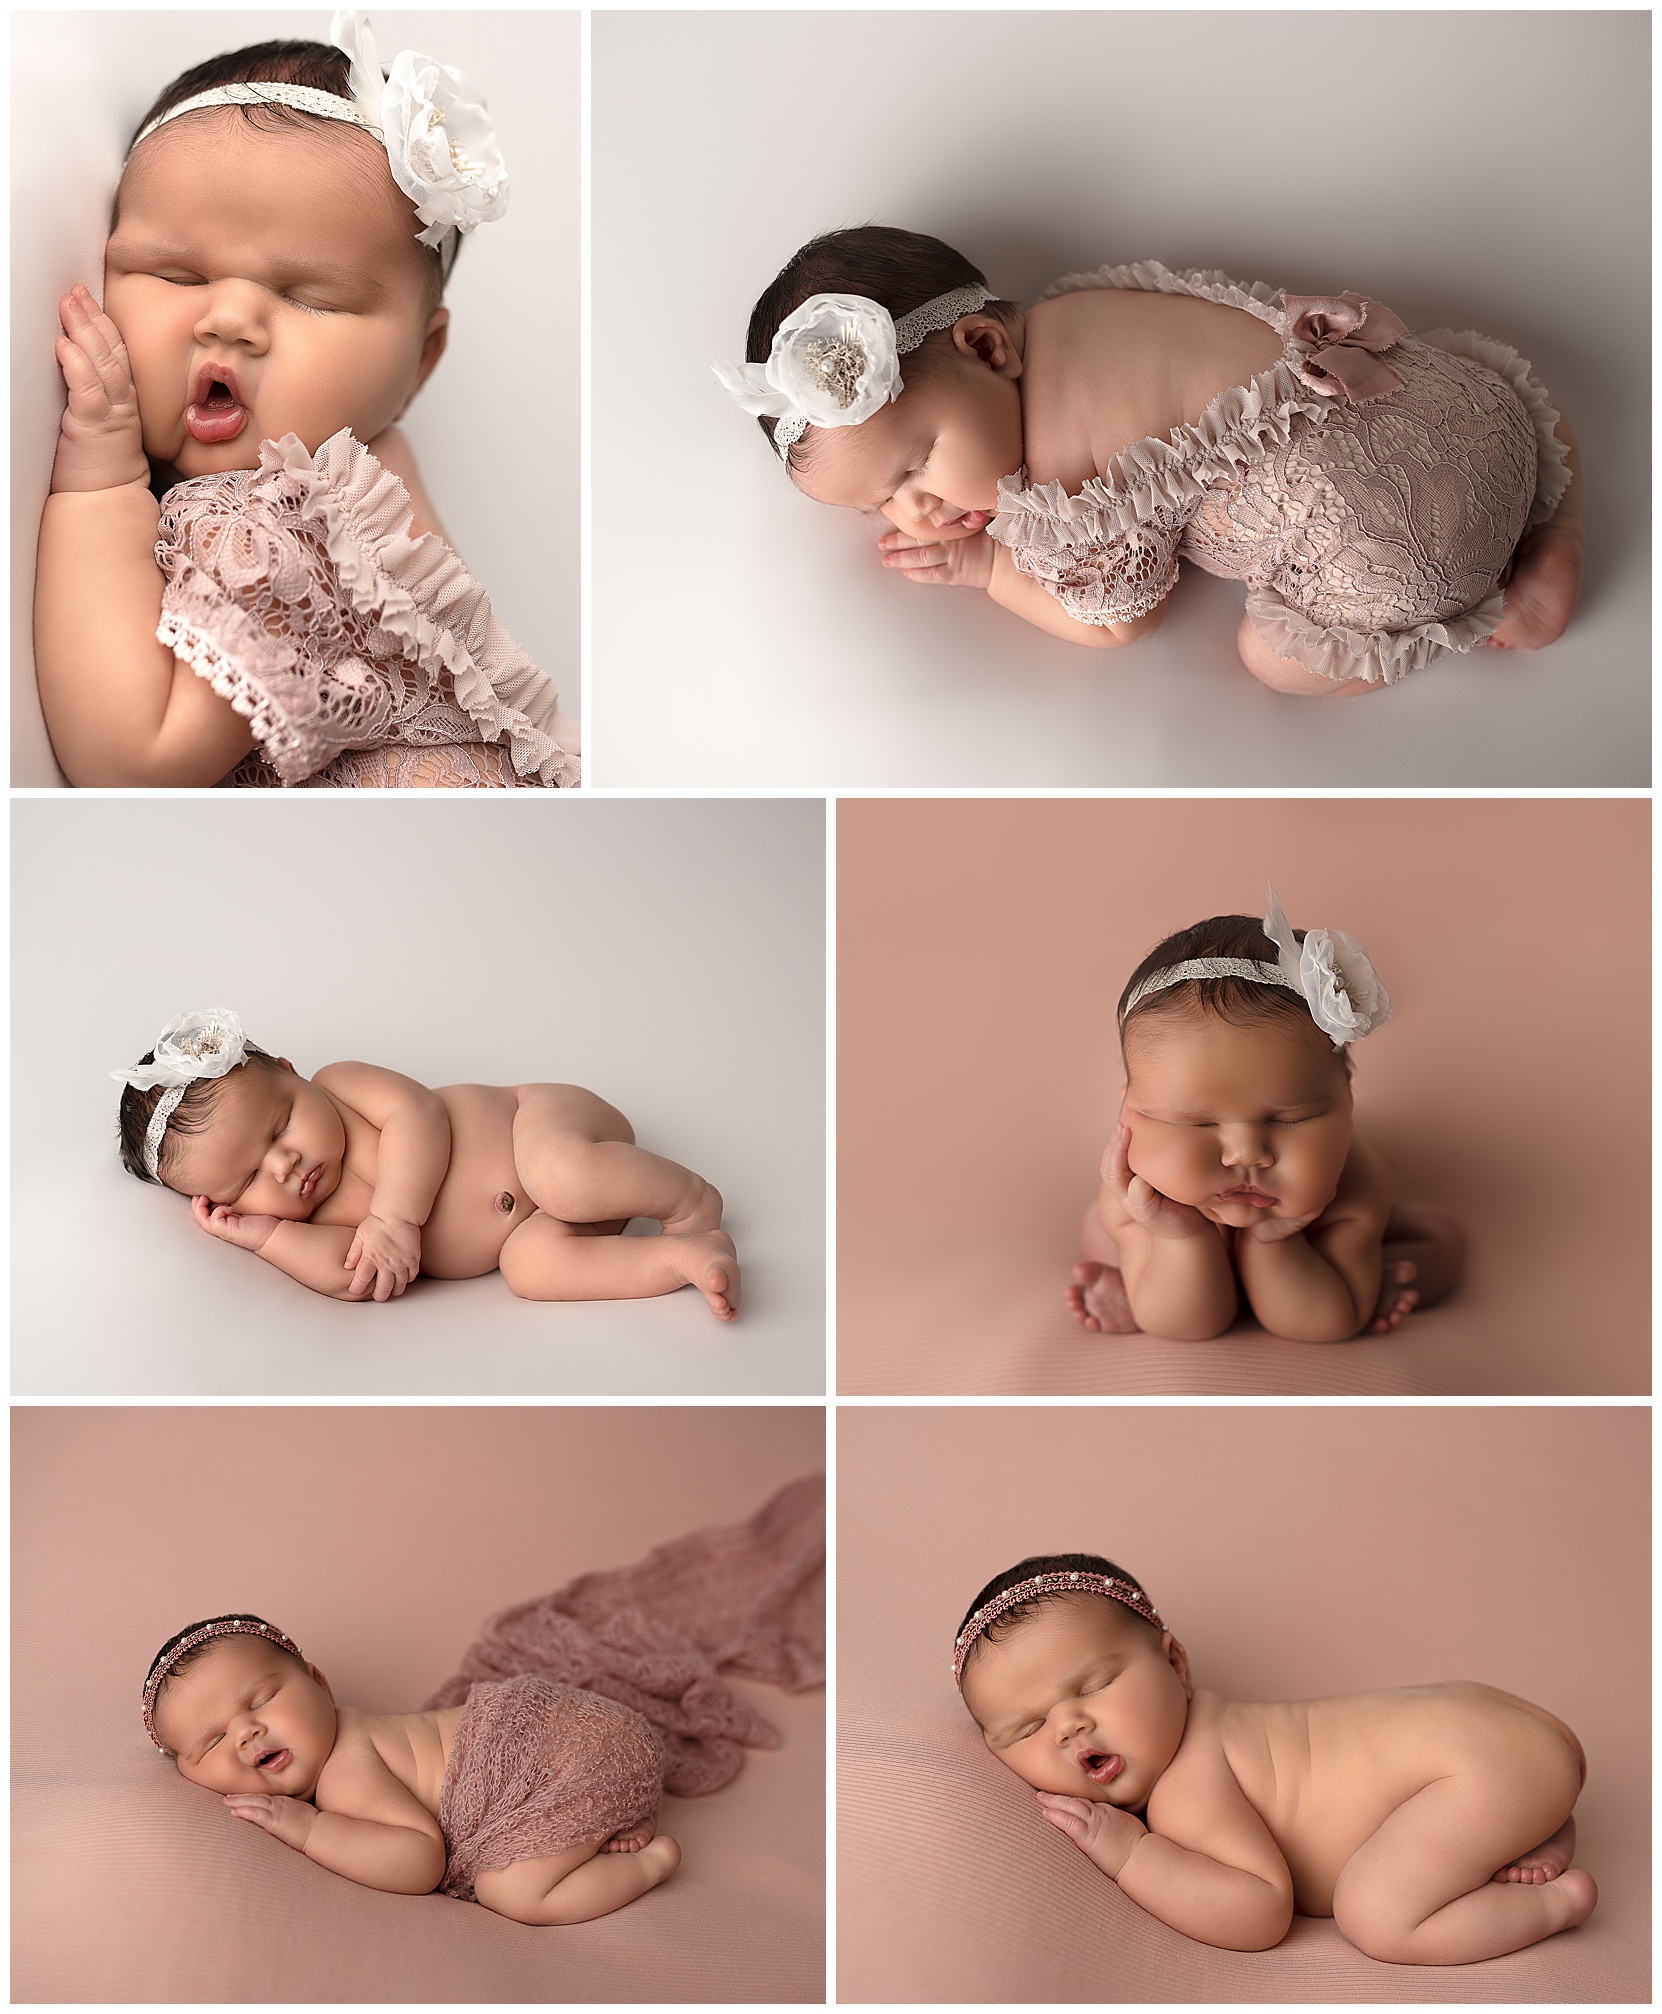 collage of images of a sleeping baby girl on pink blanket